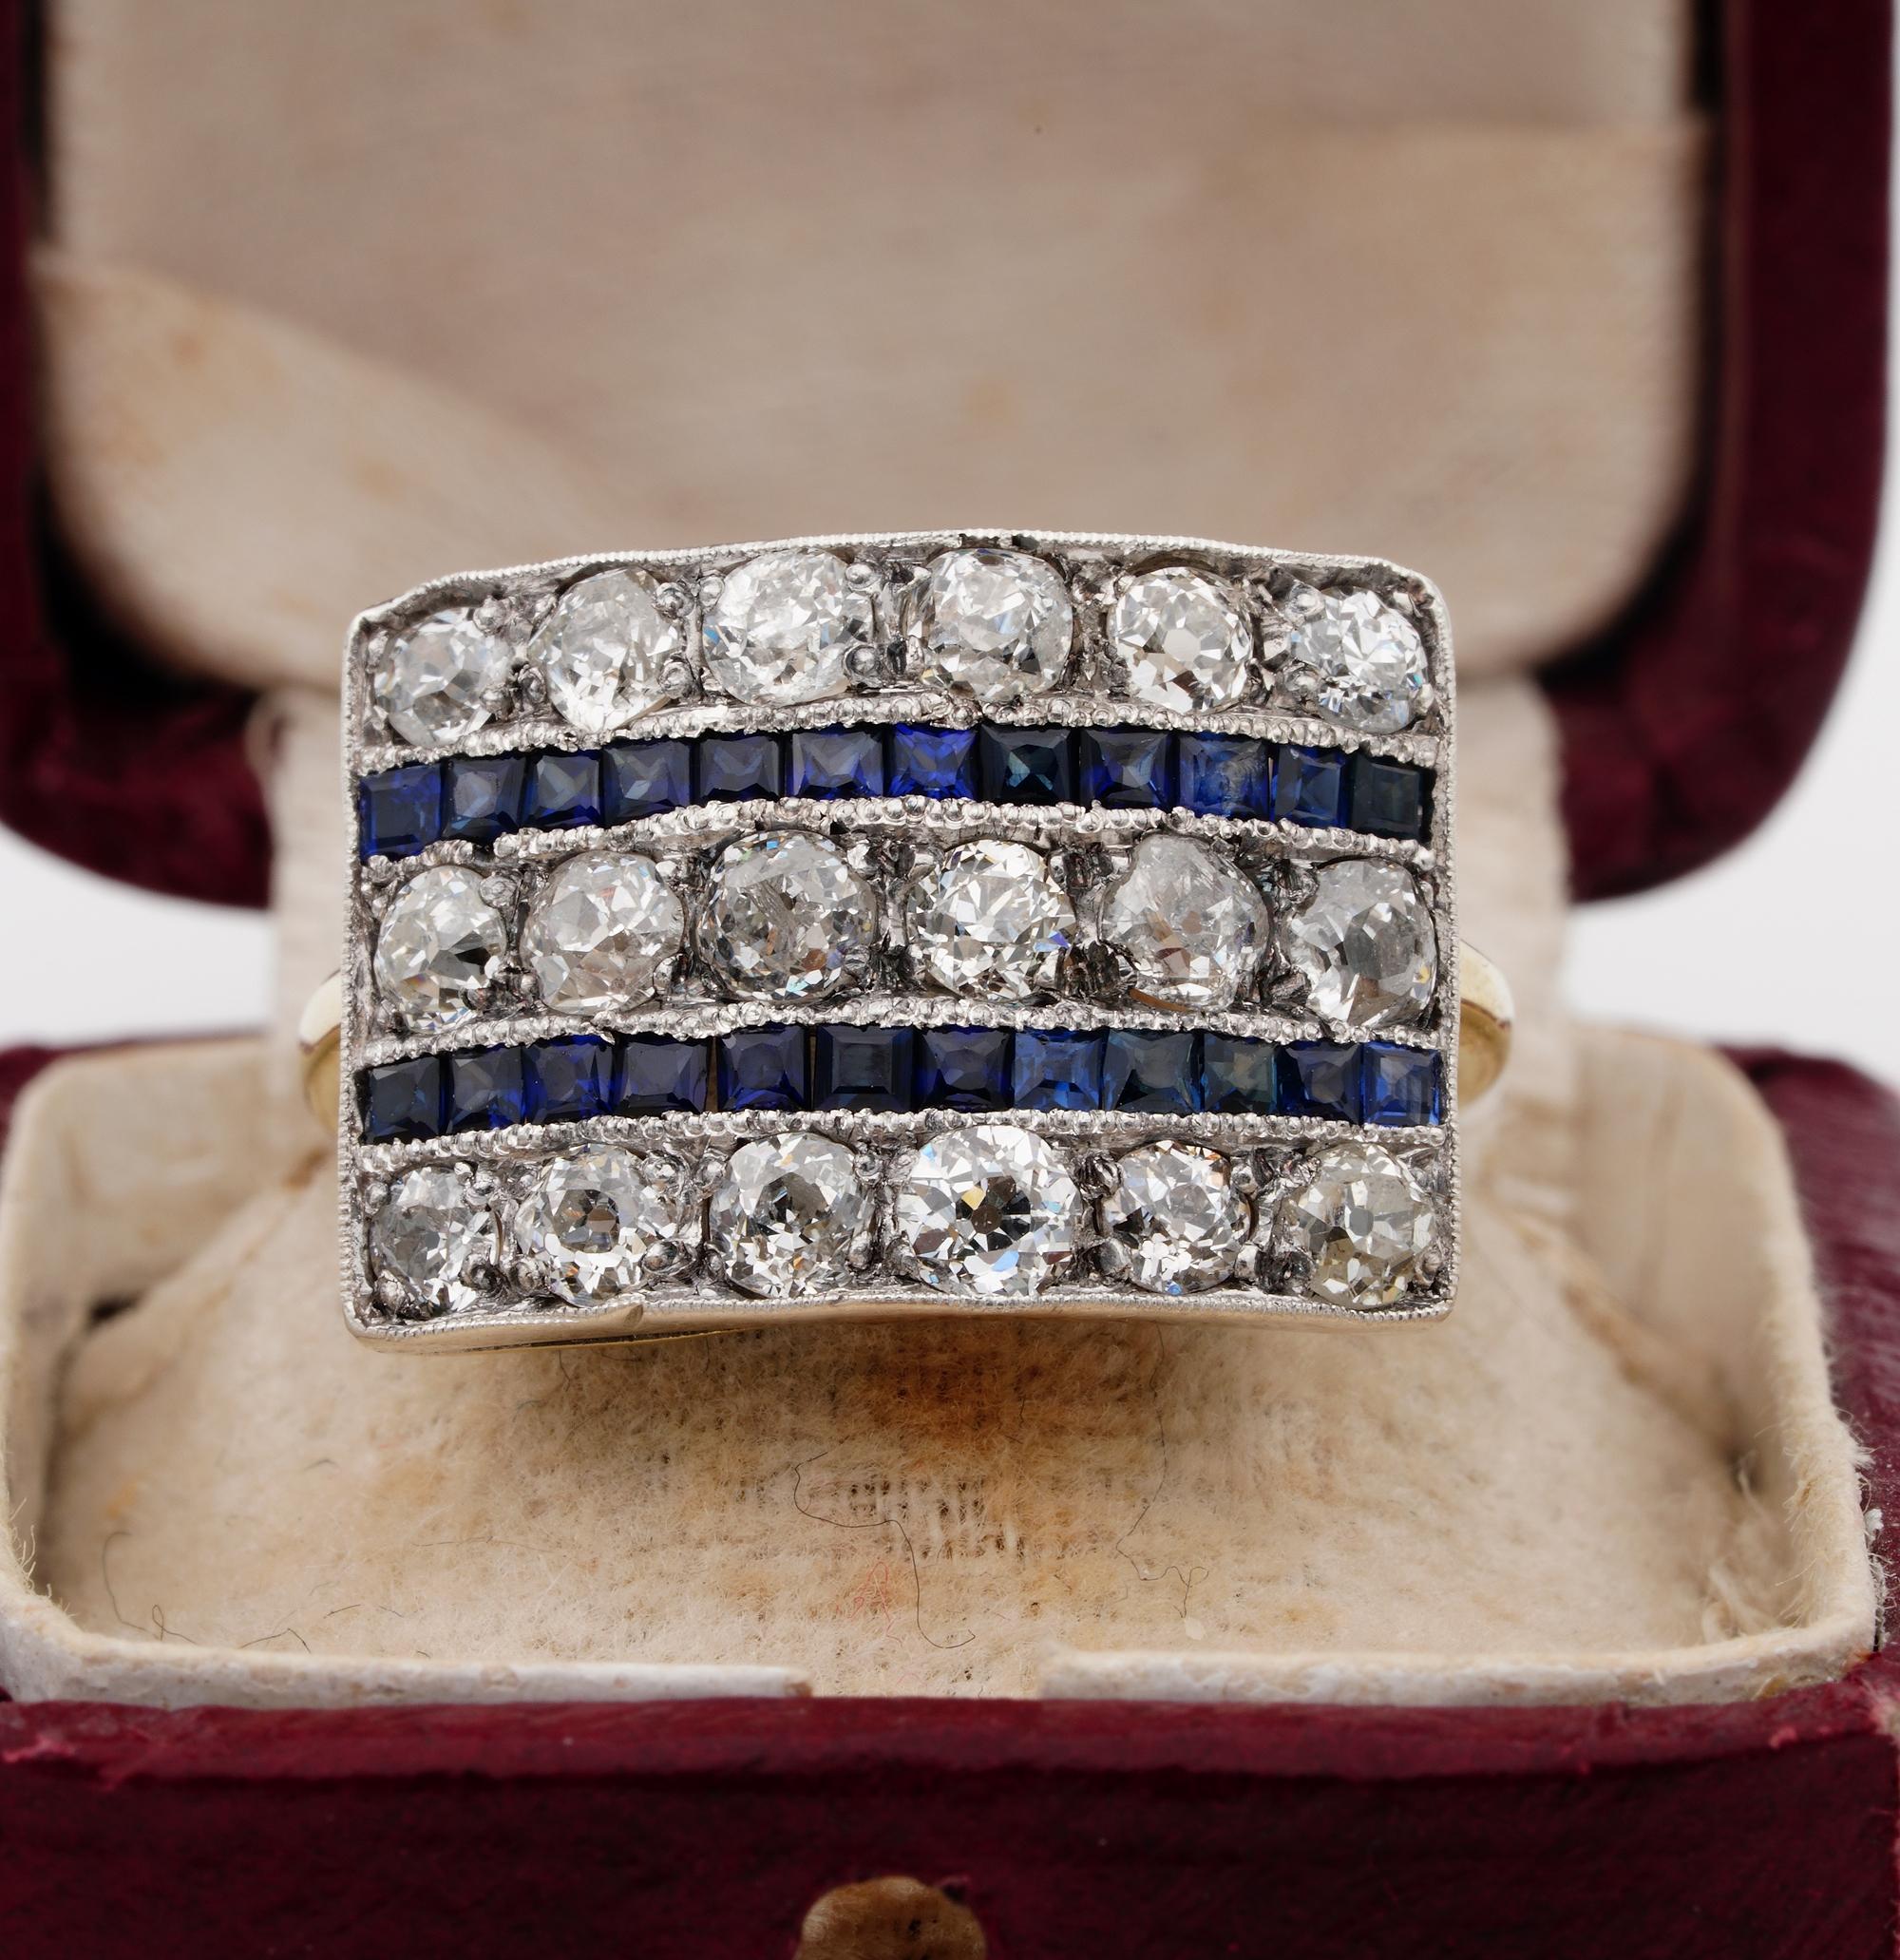 Art Deco Delight
Art Deco 1925 ca beautifully hand crafted of solid 18 KT
Wide rectangular panel ring of sleek geometric design, set with 2.70 Ct of old mine cut Diamonds H/I VVS/SI disposed into three rows, interspaced by two rows of intense Blue